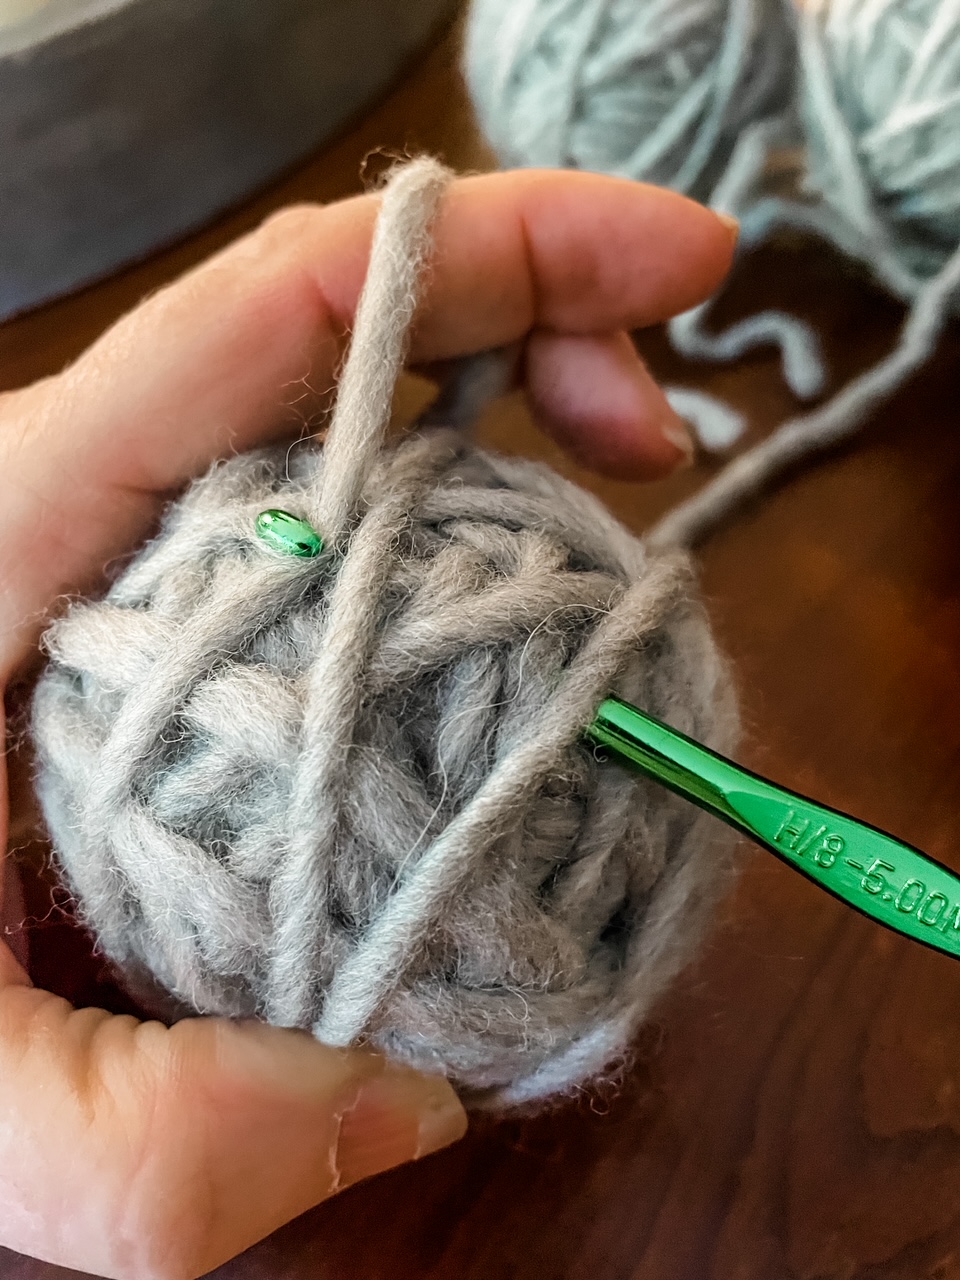 The ends of the wool yarn being woven into the ball with a crochet hook